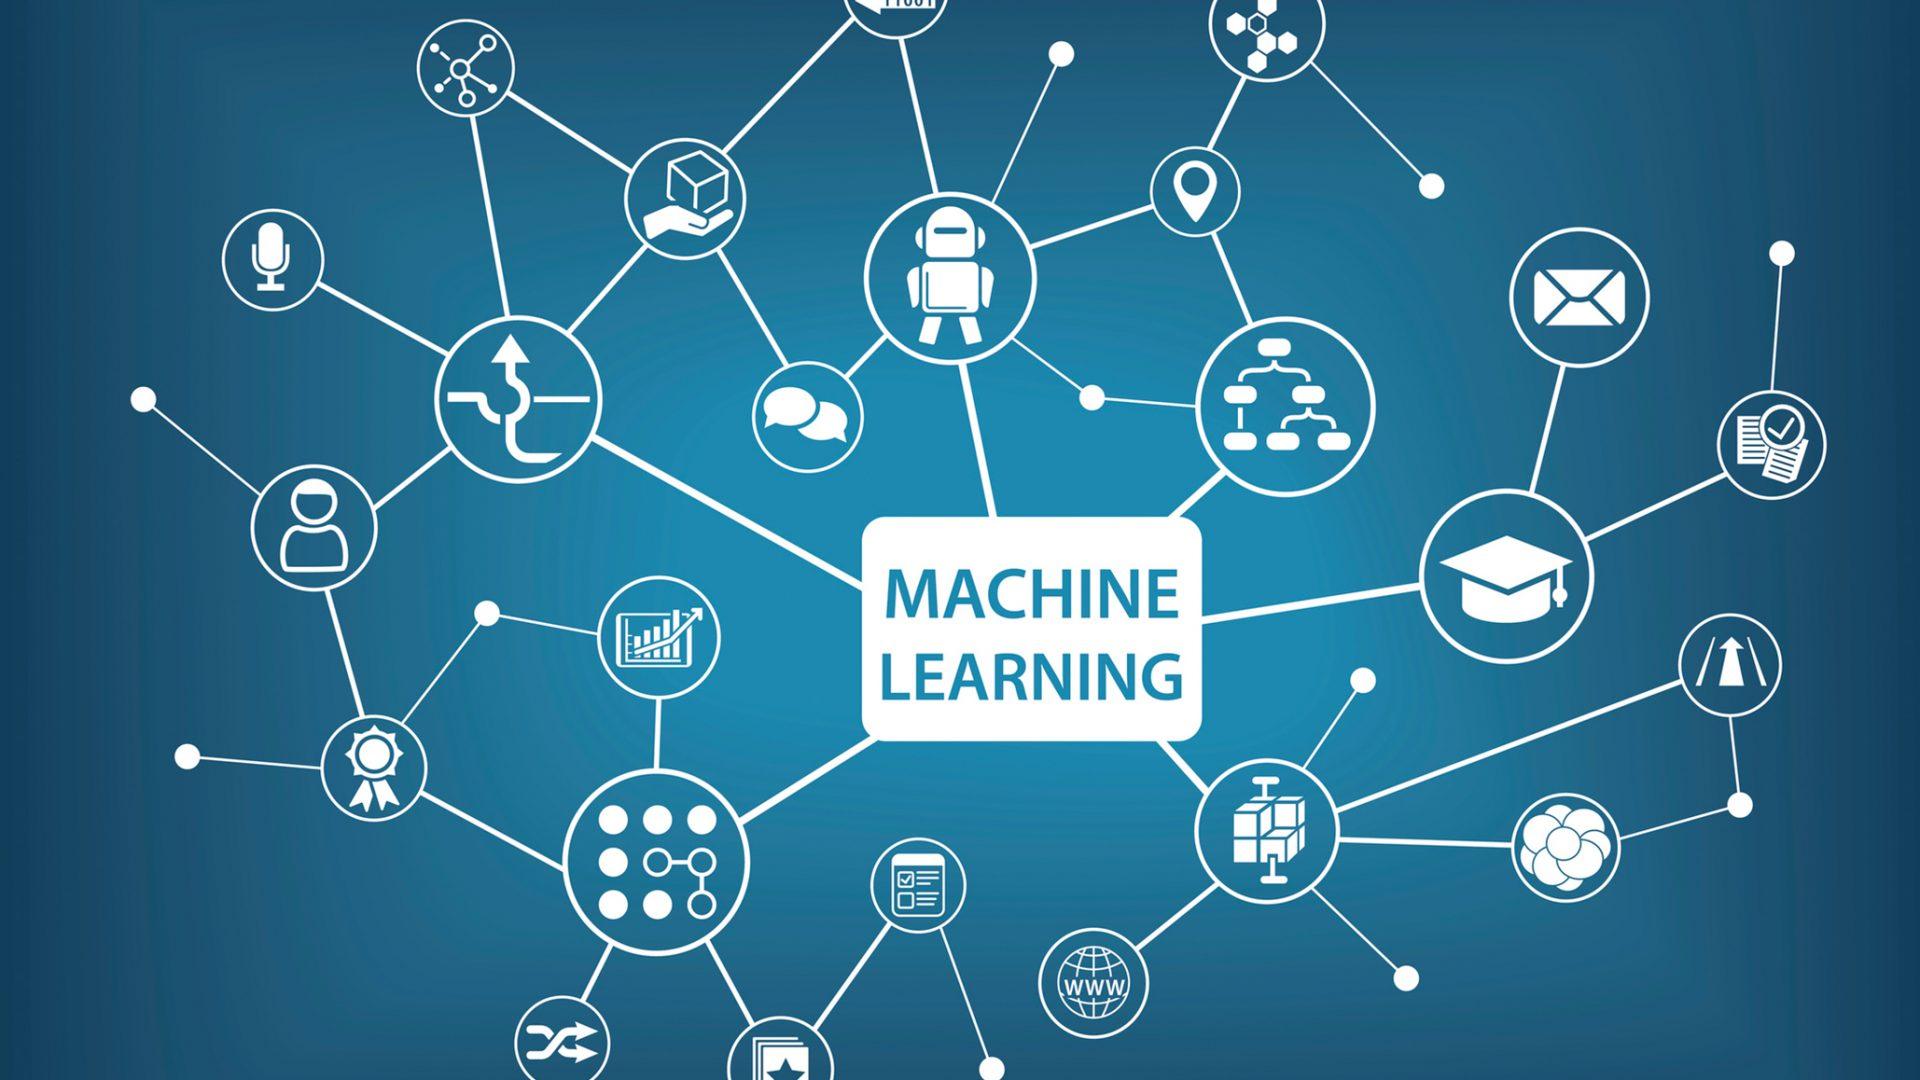 Businesses are Using Machine Learning to Enhance Their IoT